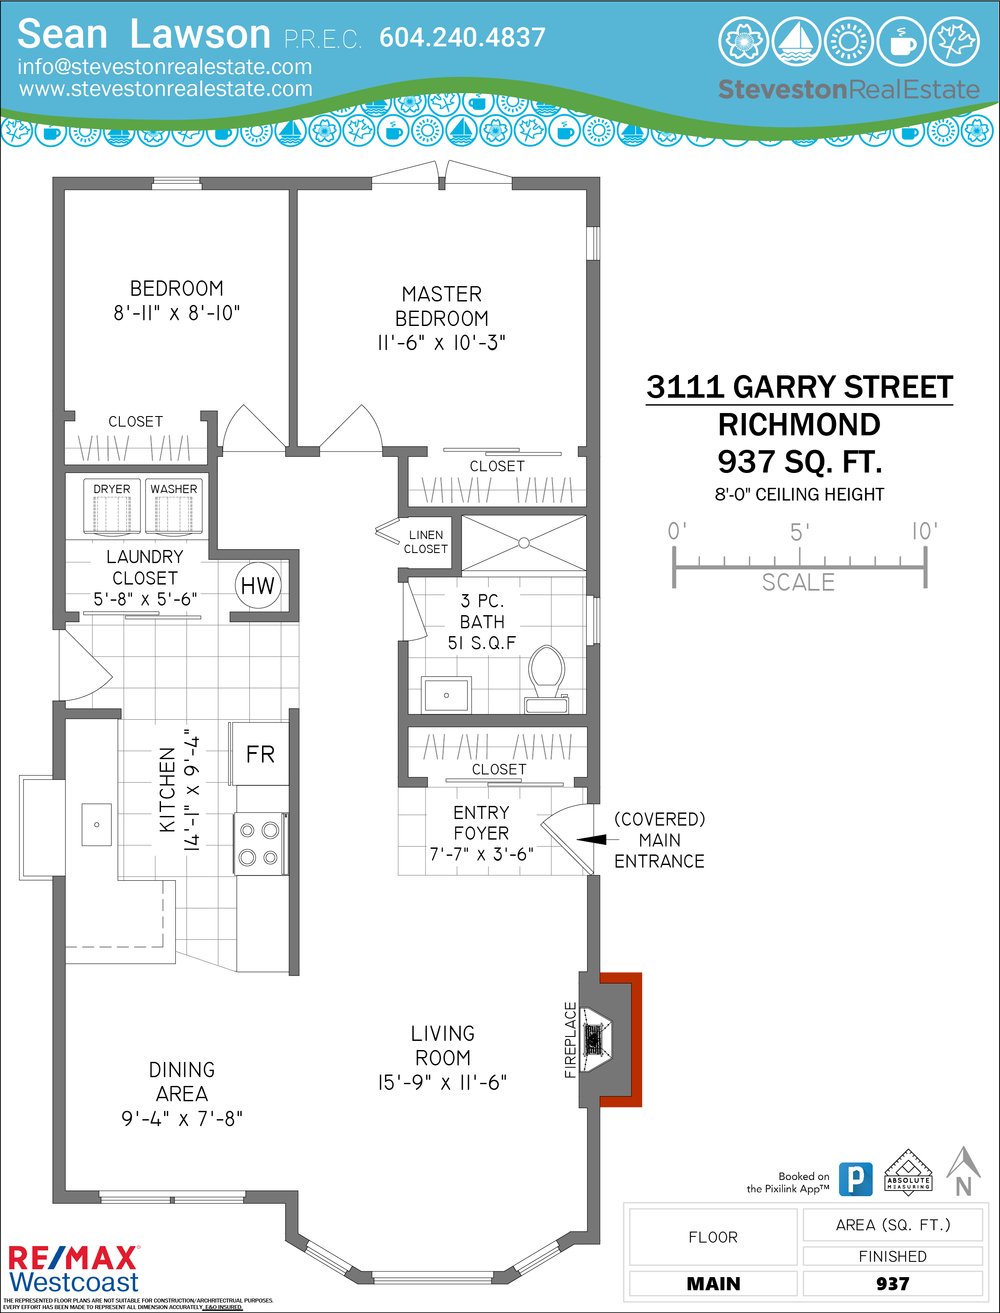 Floor Plan for a 2 Bedroom House in 